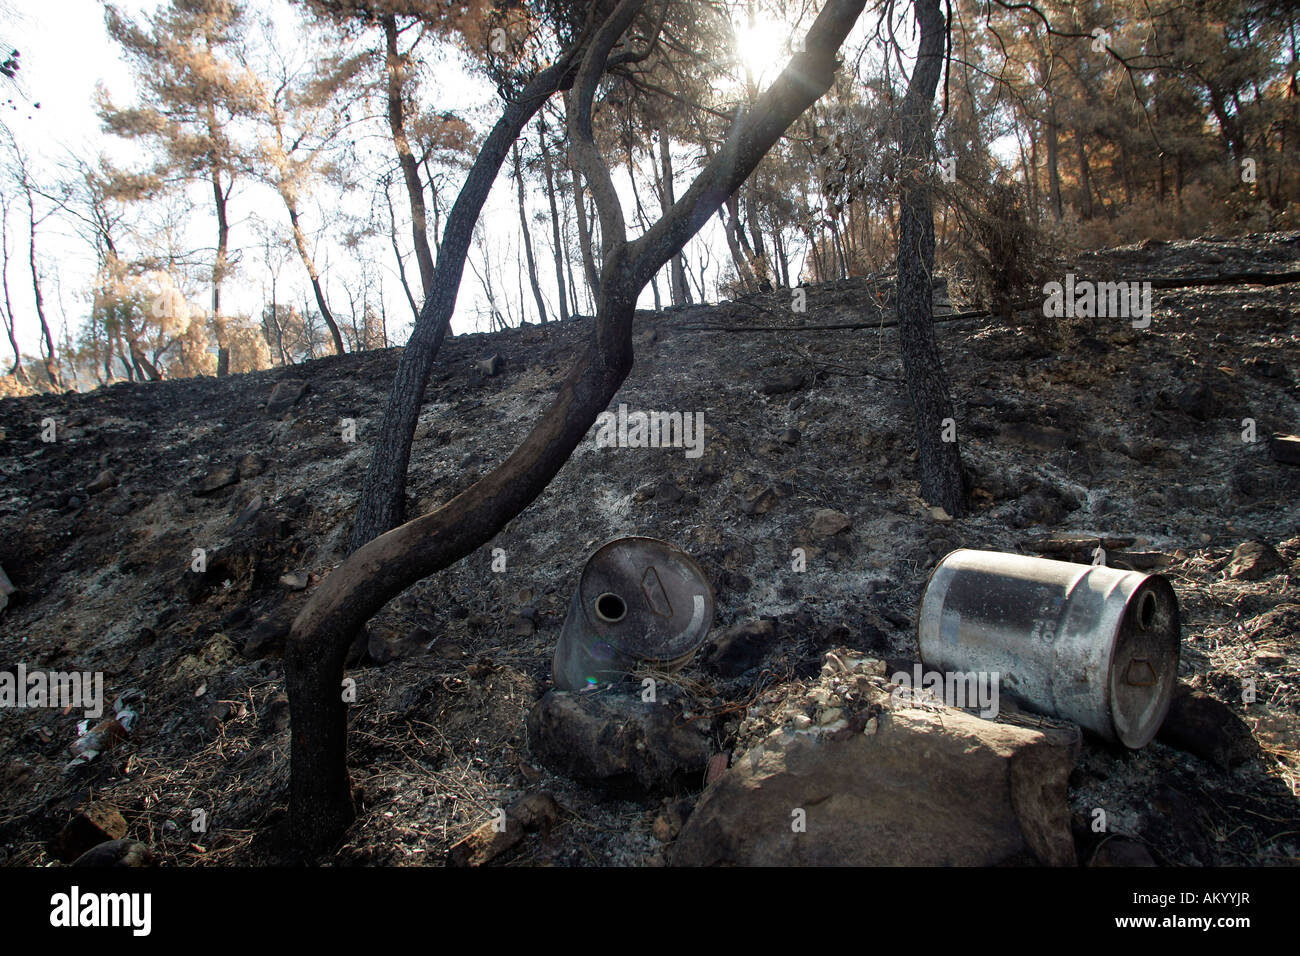 Greece four weeks after the fire on peloponnese. A container lying besides burnt trees between Vrina and Smerna. Peloponnese, G Stock Photo